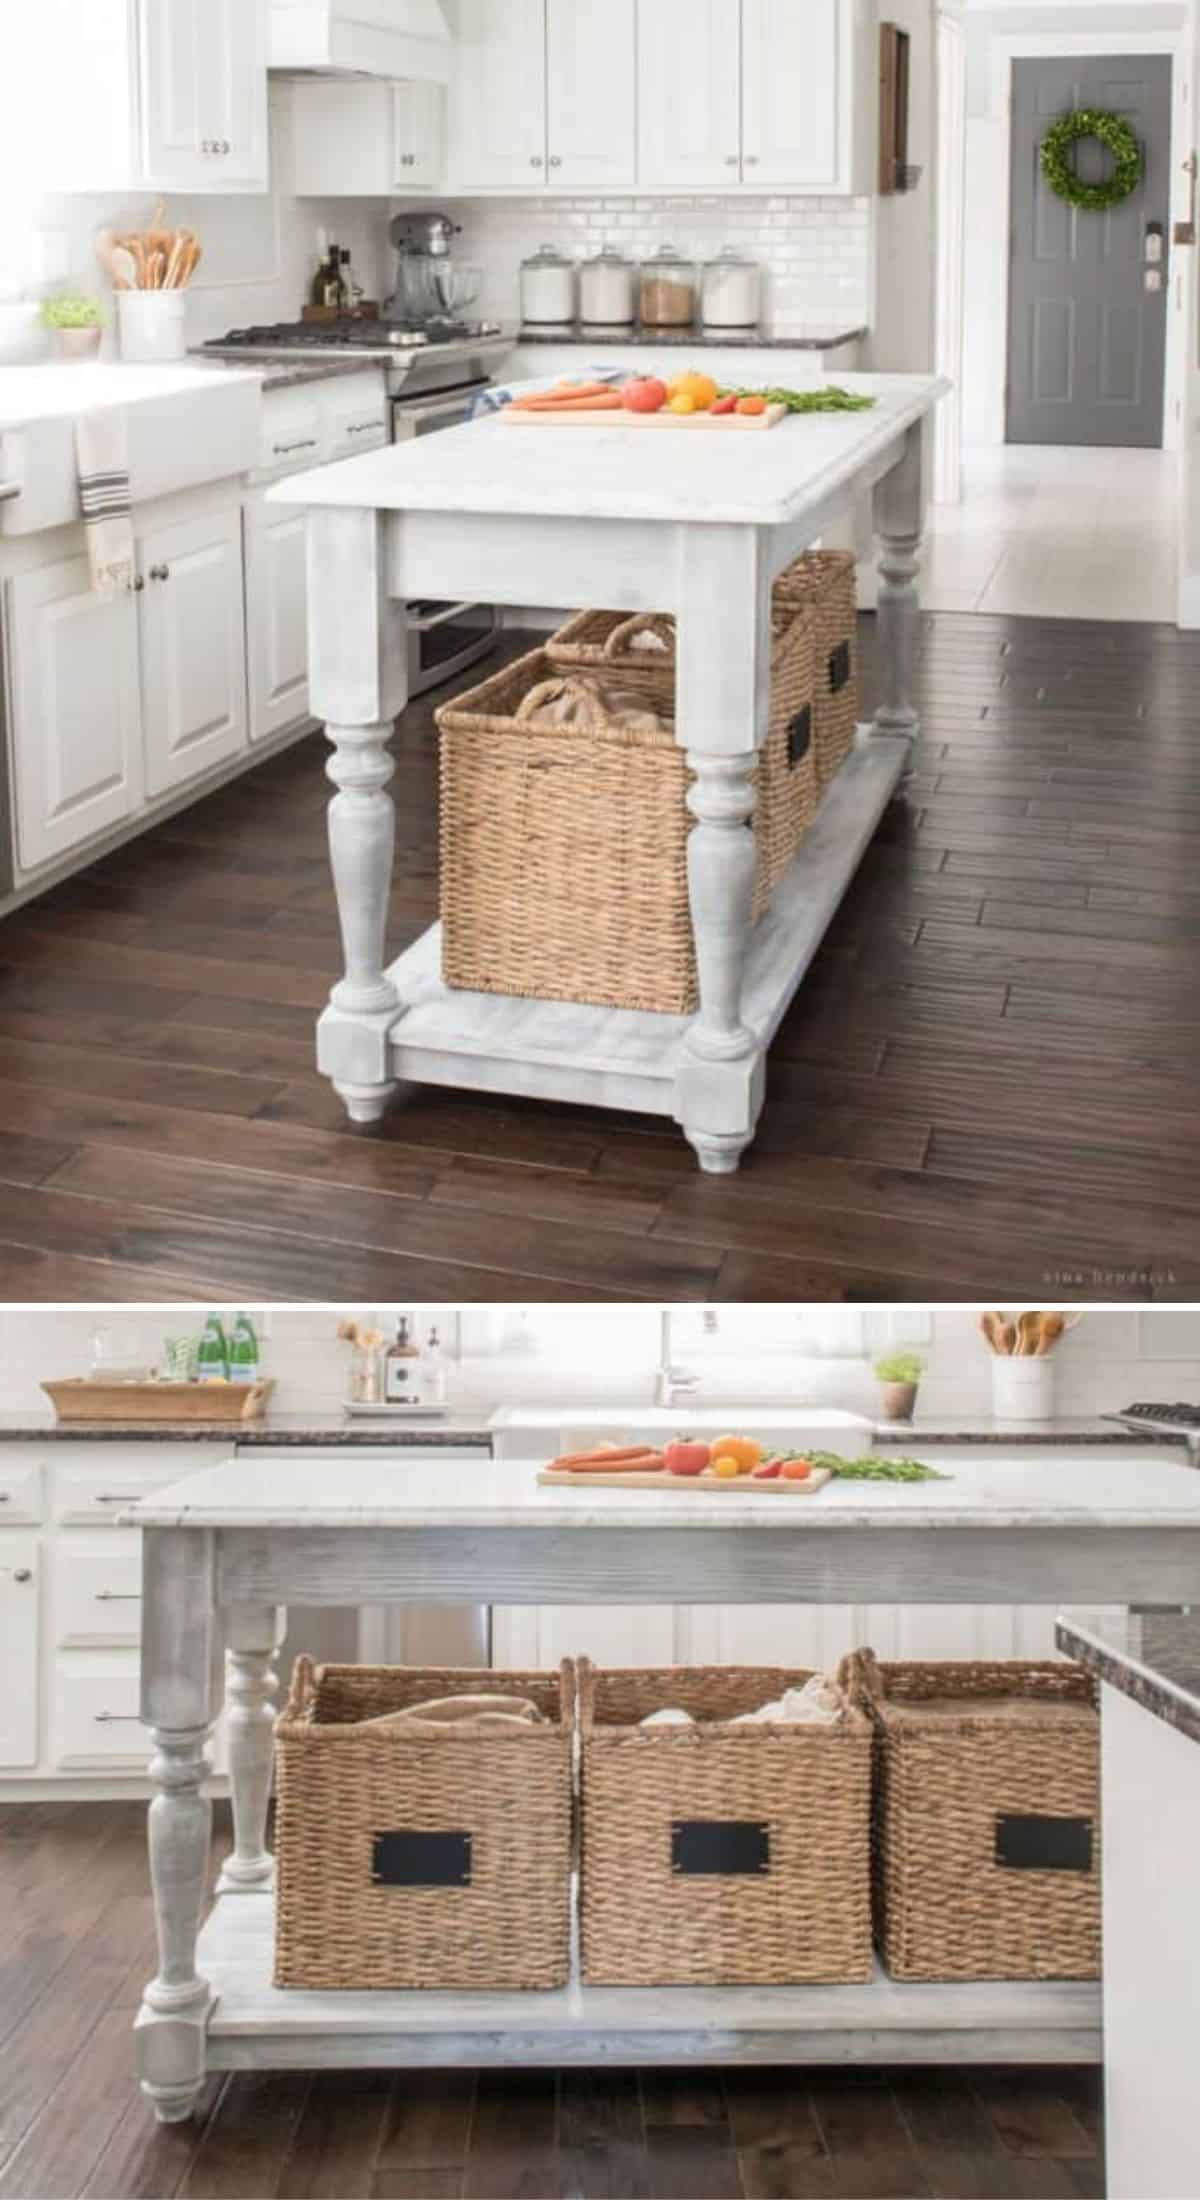 DIY Country Kitchen Island collage.